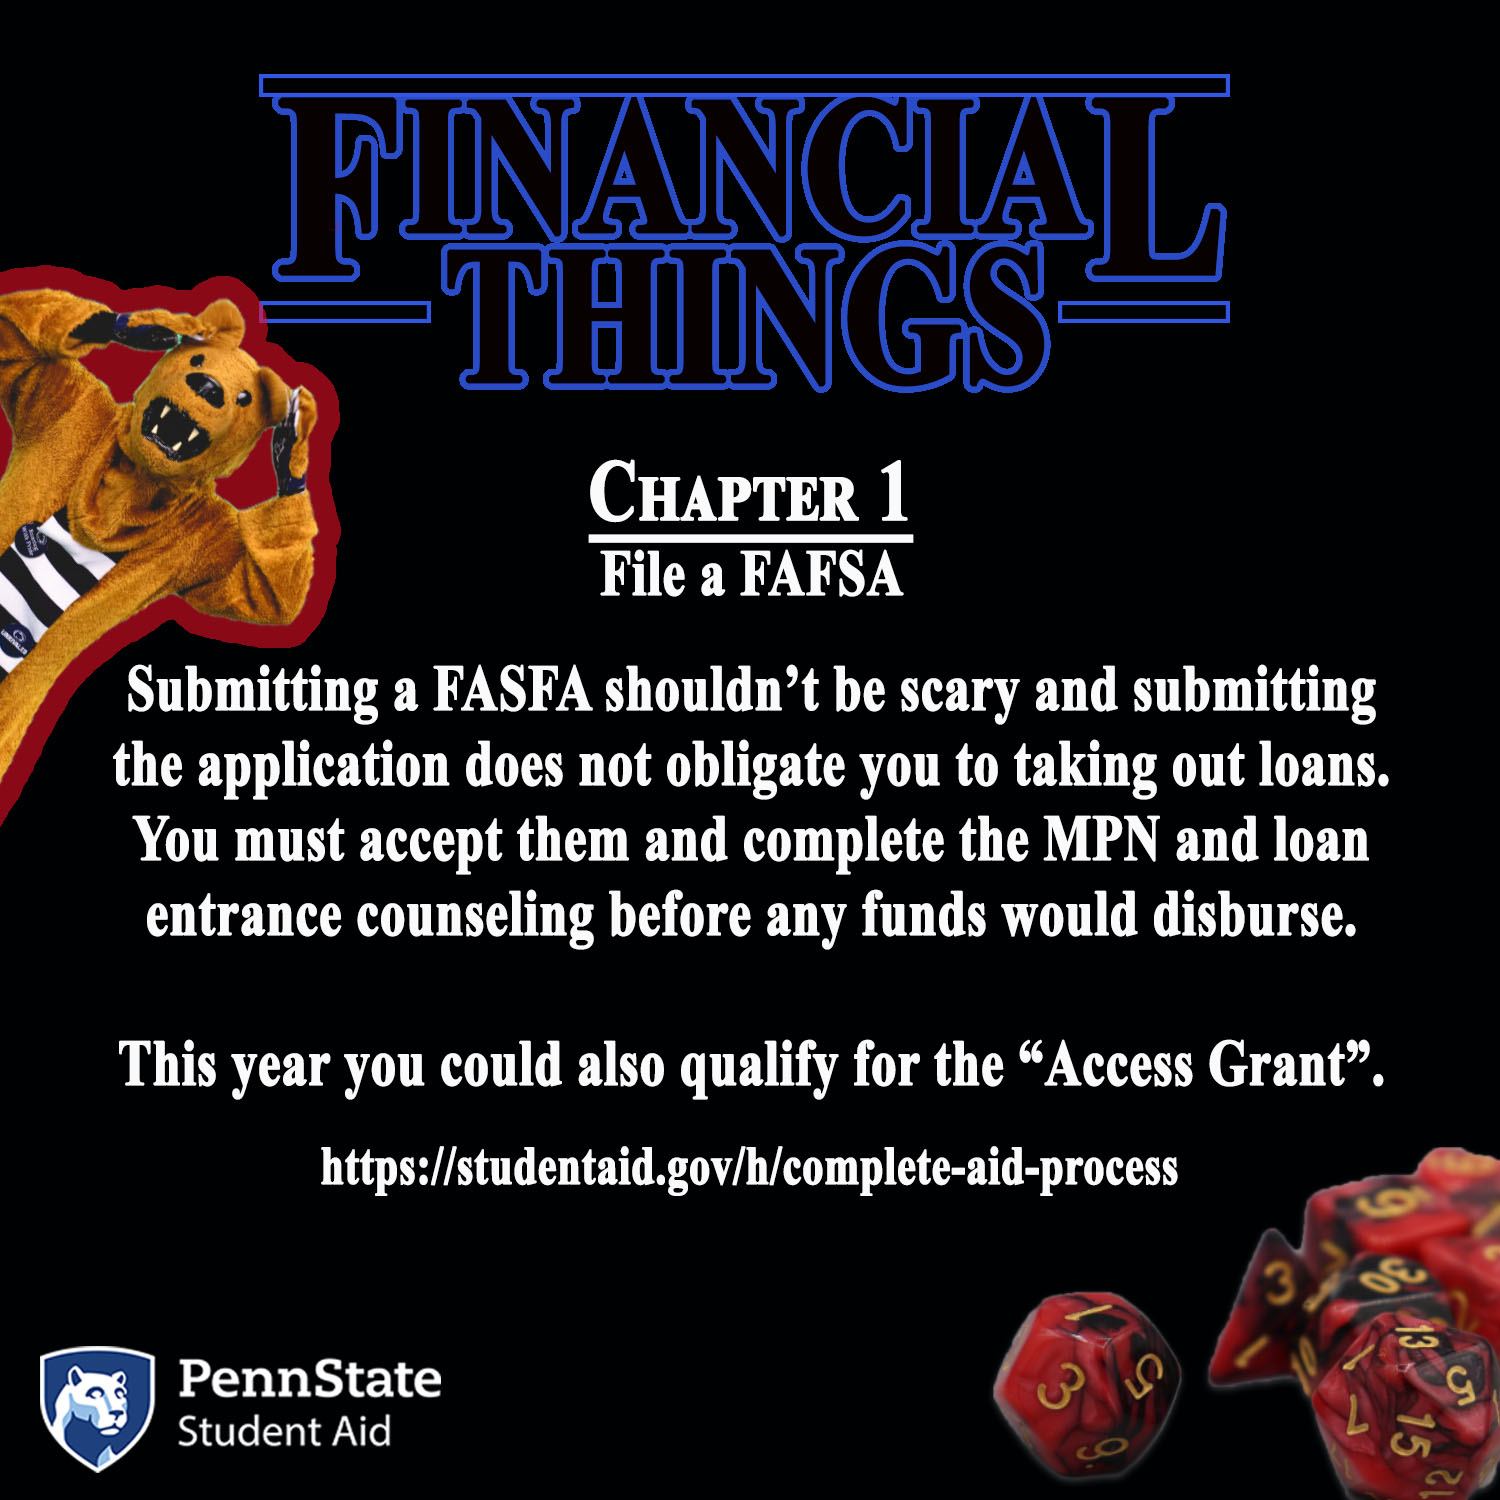 Financial things with scared lion mascot.